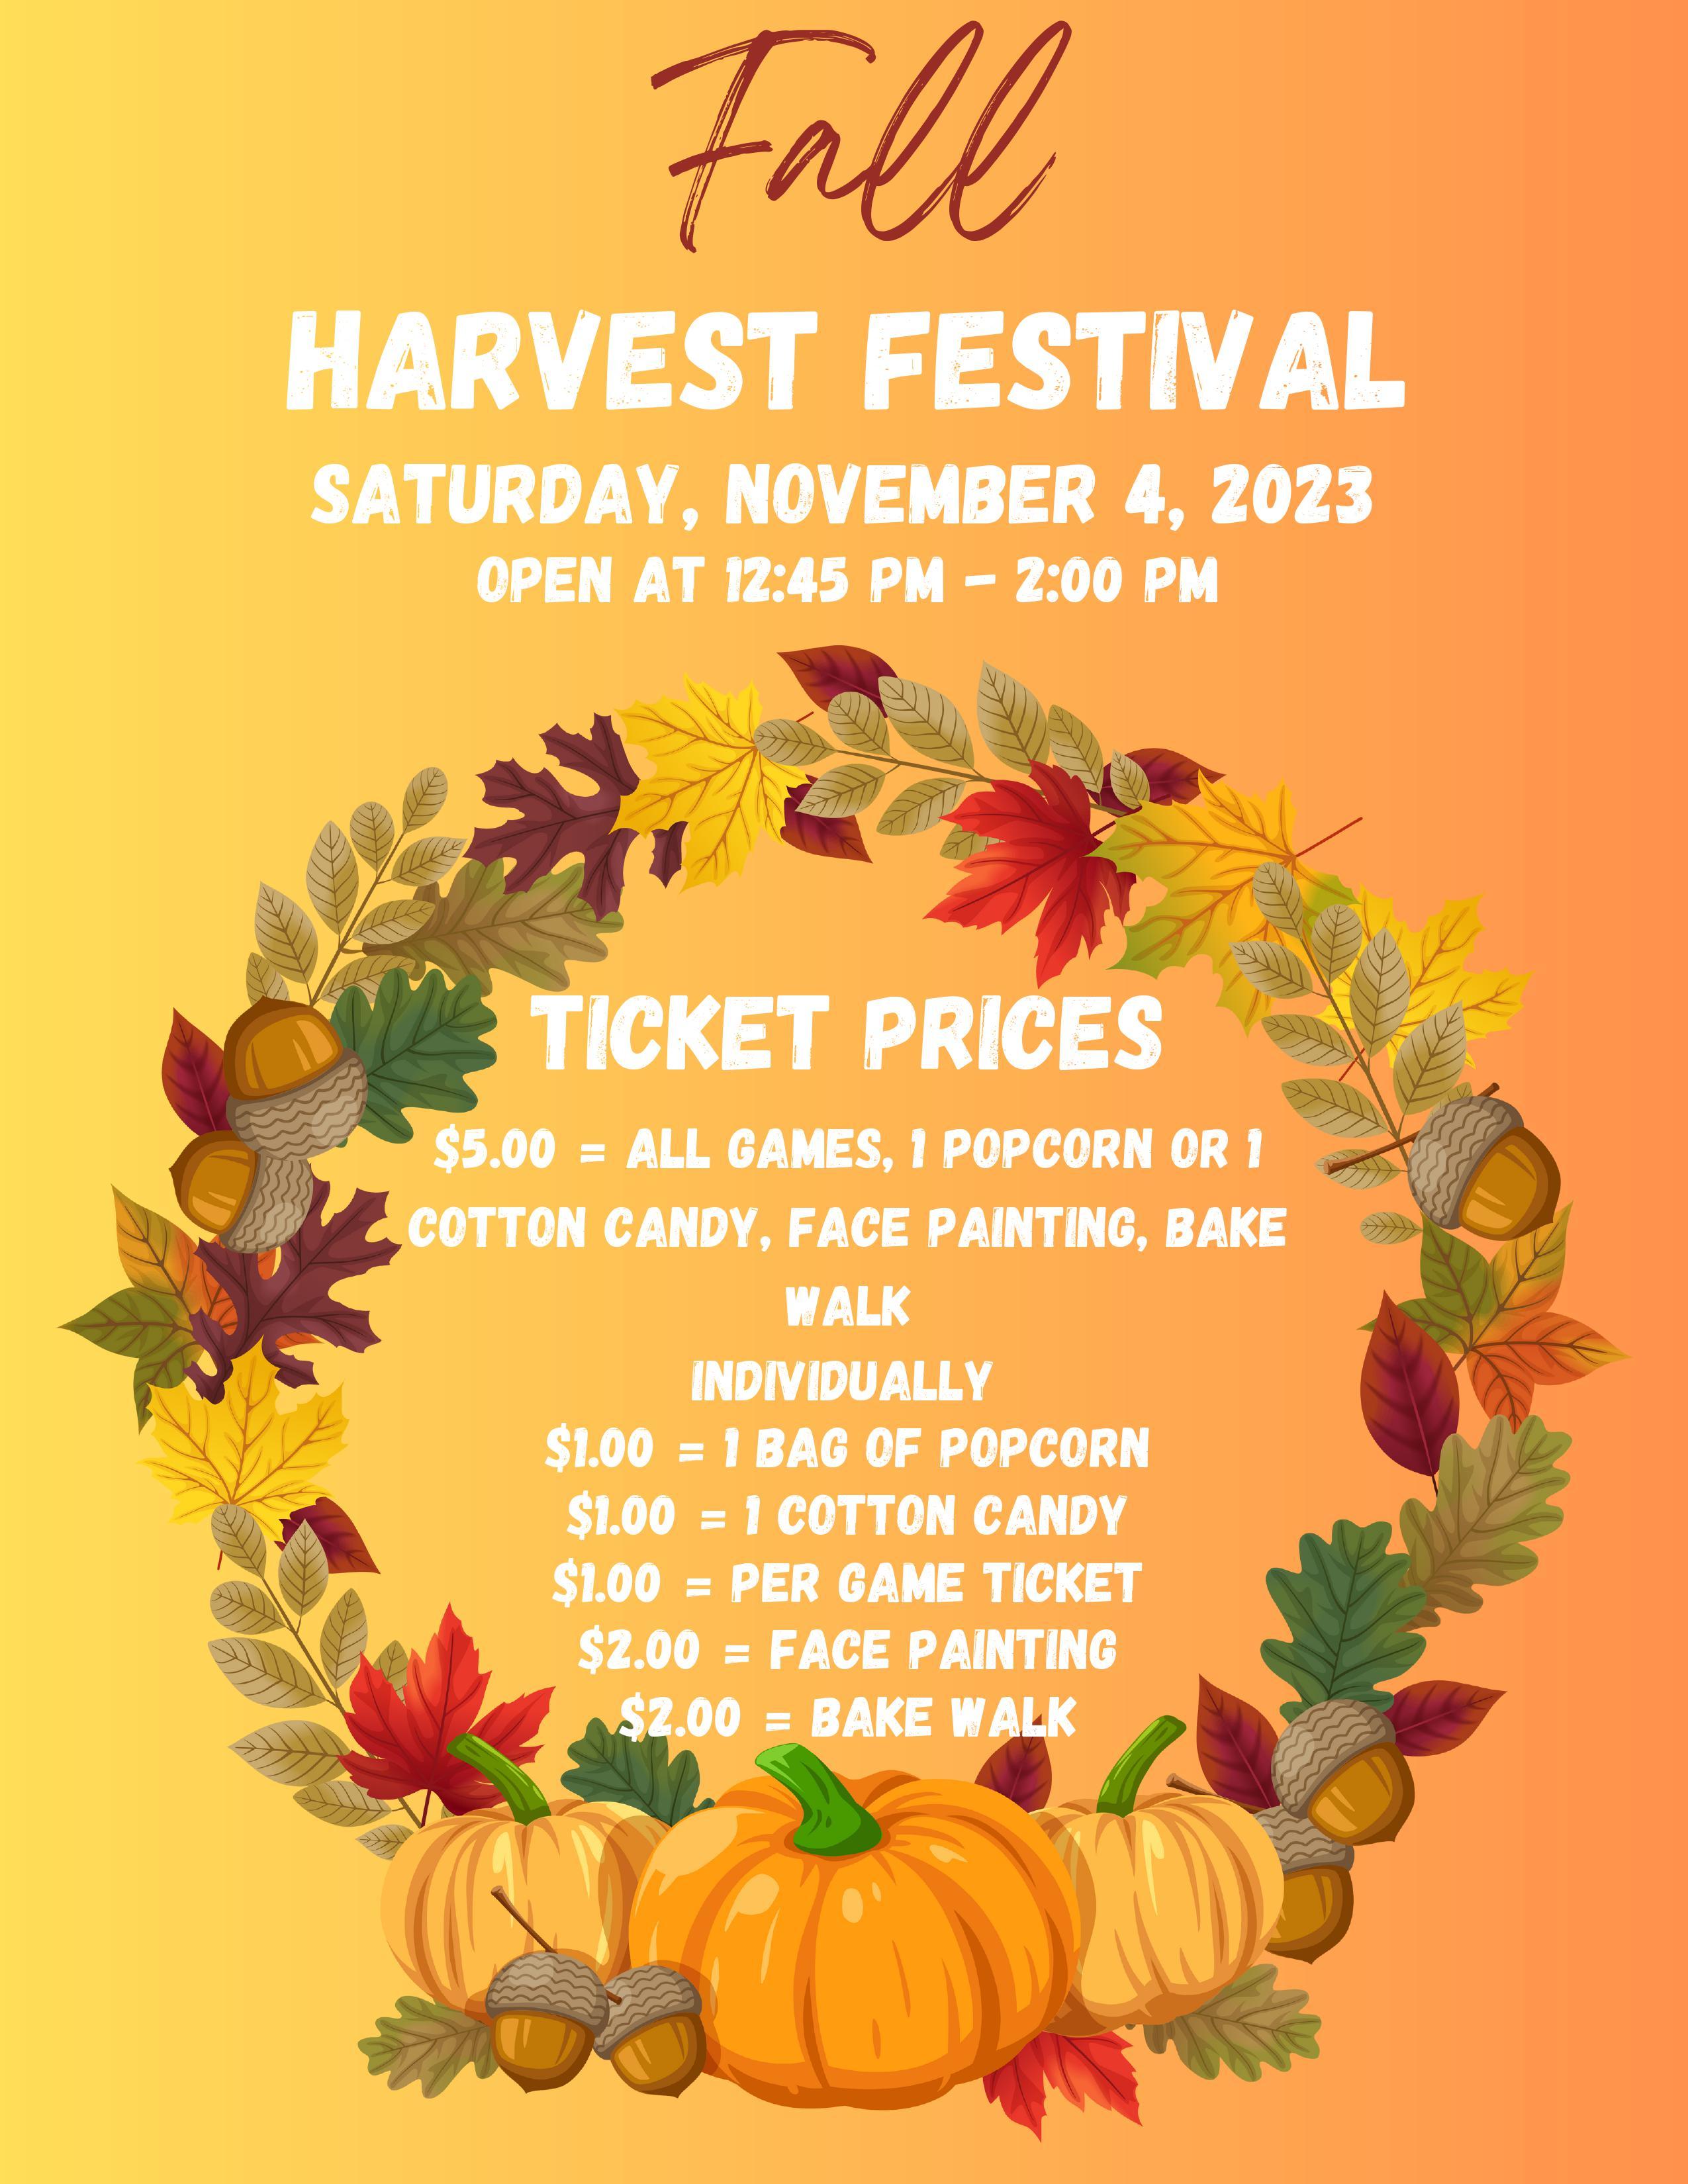 The fall festival will take place on Saturday, November 4th from 12:45-2:00